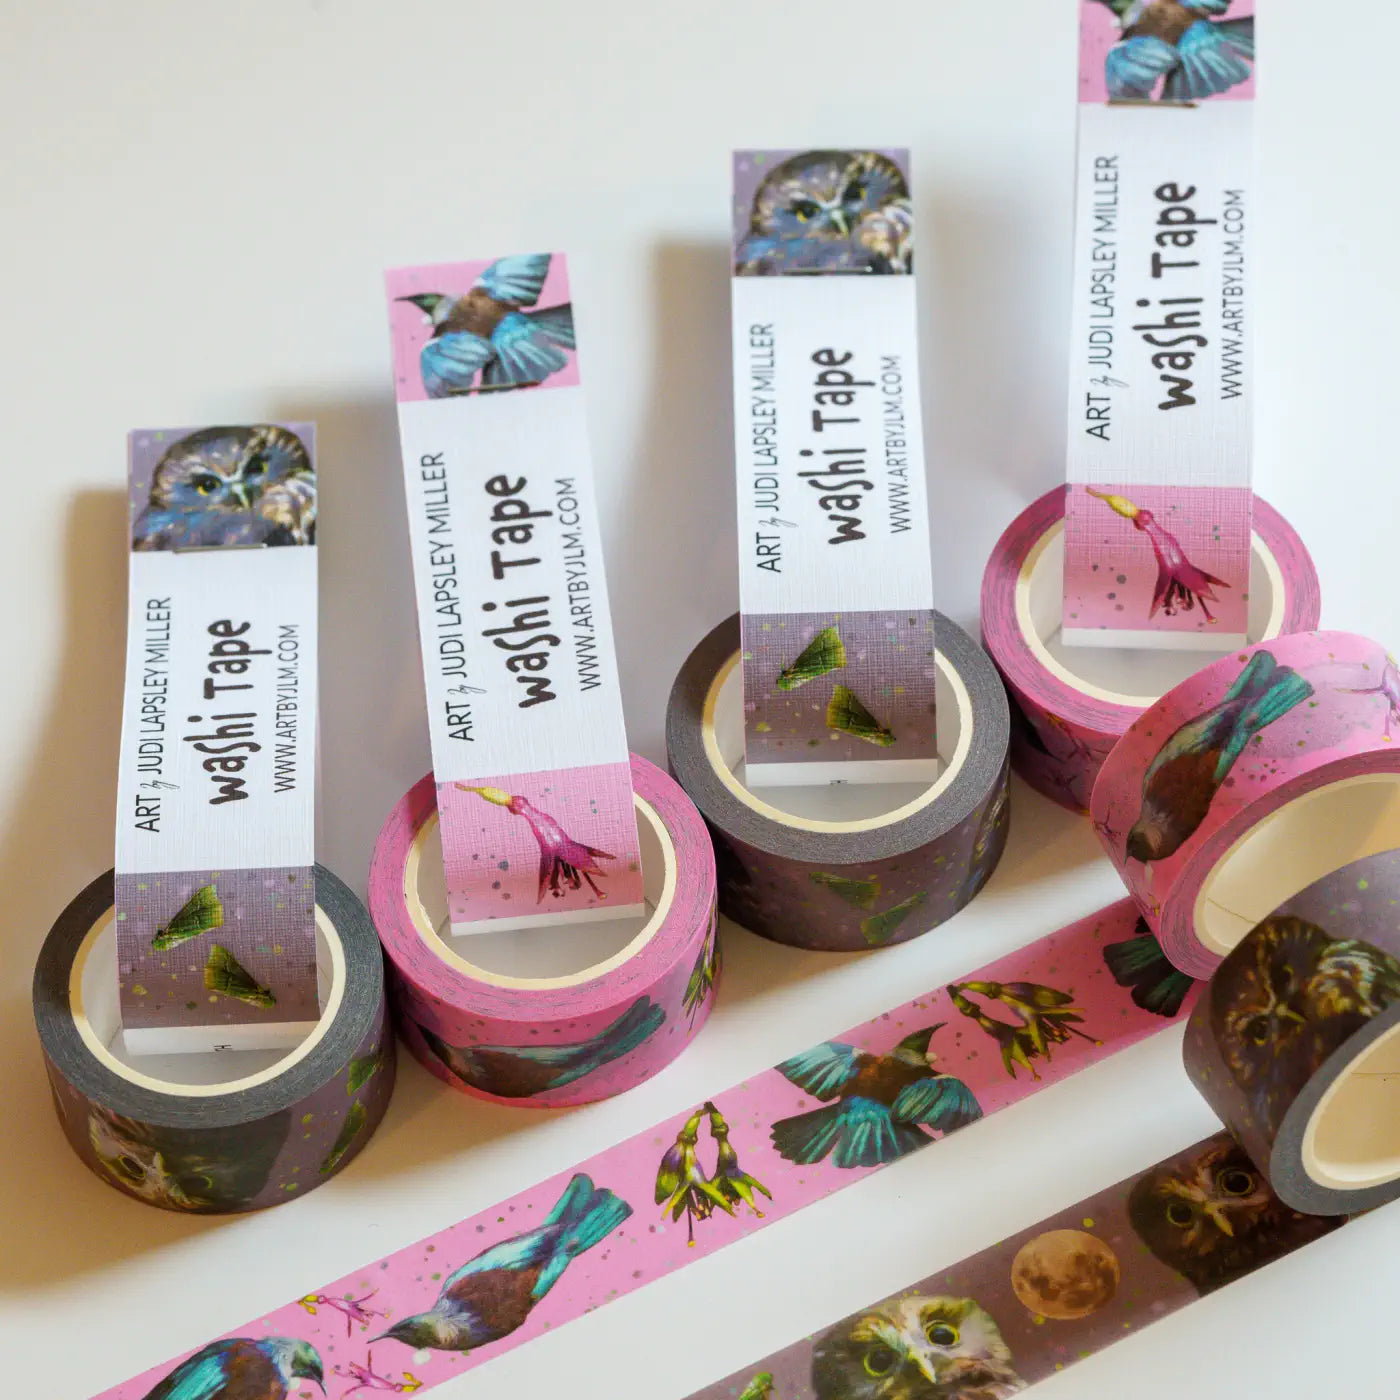 6 rolls of washi tape with cardboard labels looped through